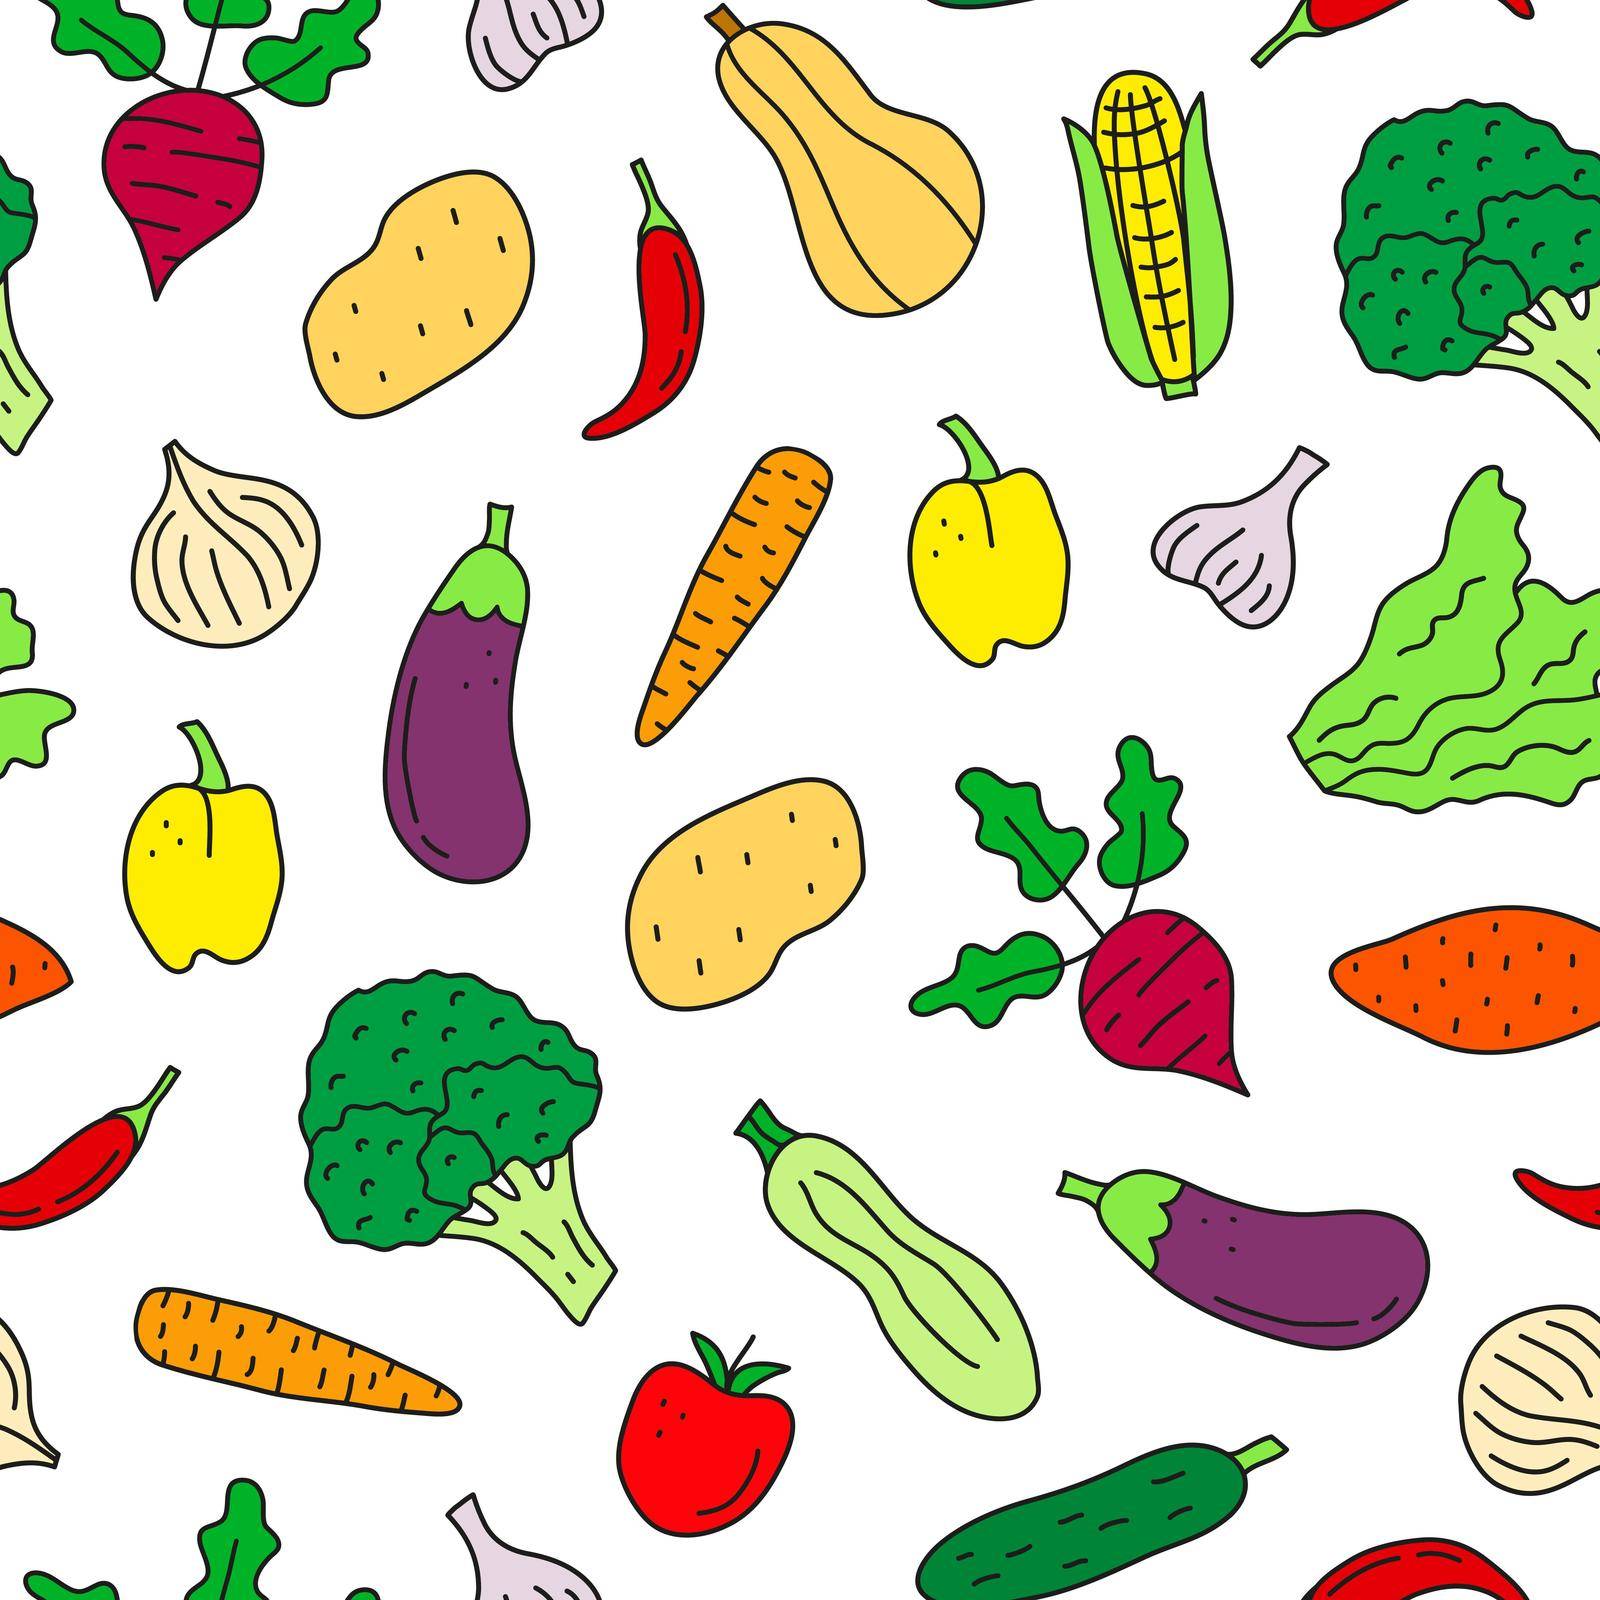 Seamless pattern with doodle colorful vegetables including broccoli, garlic, cucumber, sweet potato, onion, corn, beet, zucchini, eggplant, butternut, tomato, carrot, chili, lettuce, bell pepper.